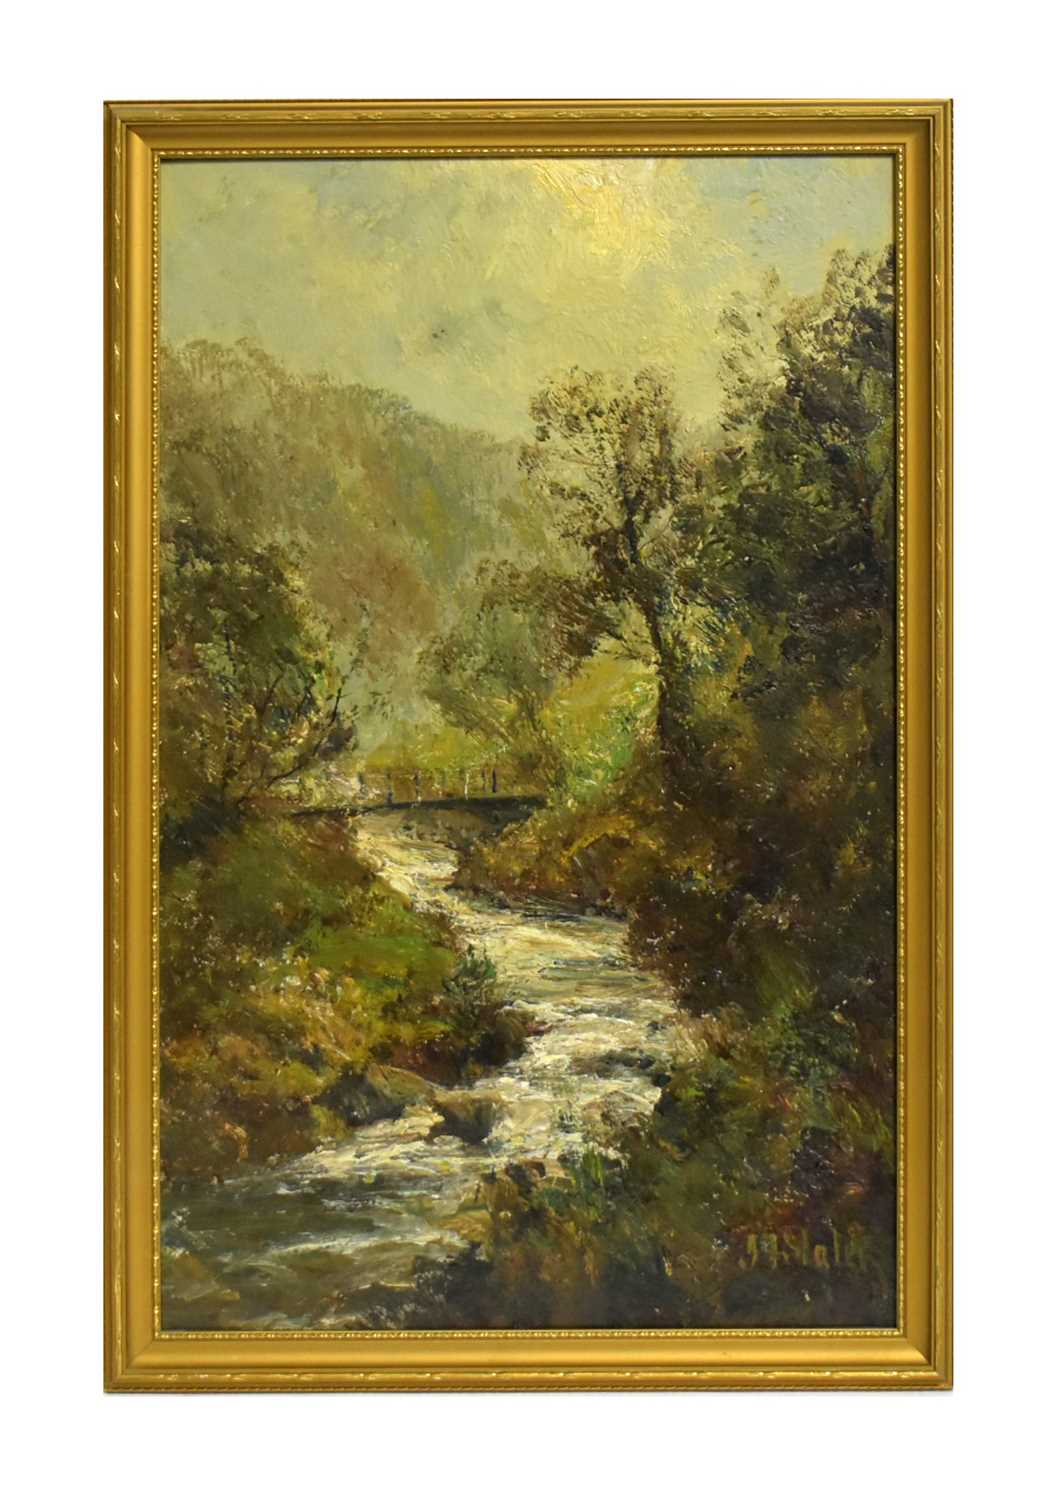 Lot 787 - John Falconar Slater - Blustery woodland view with serpentine stream | oil